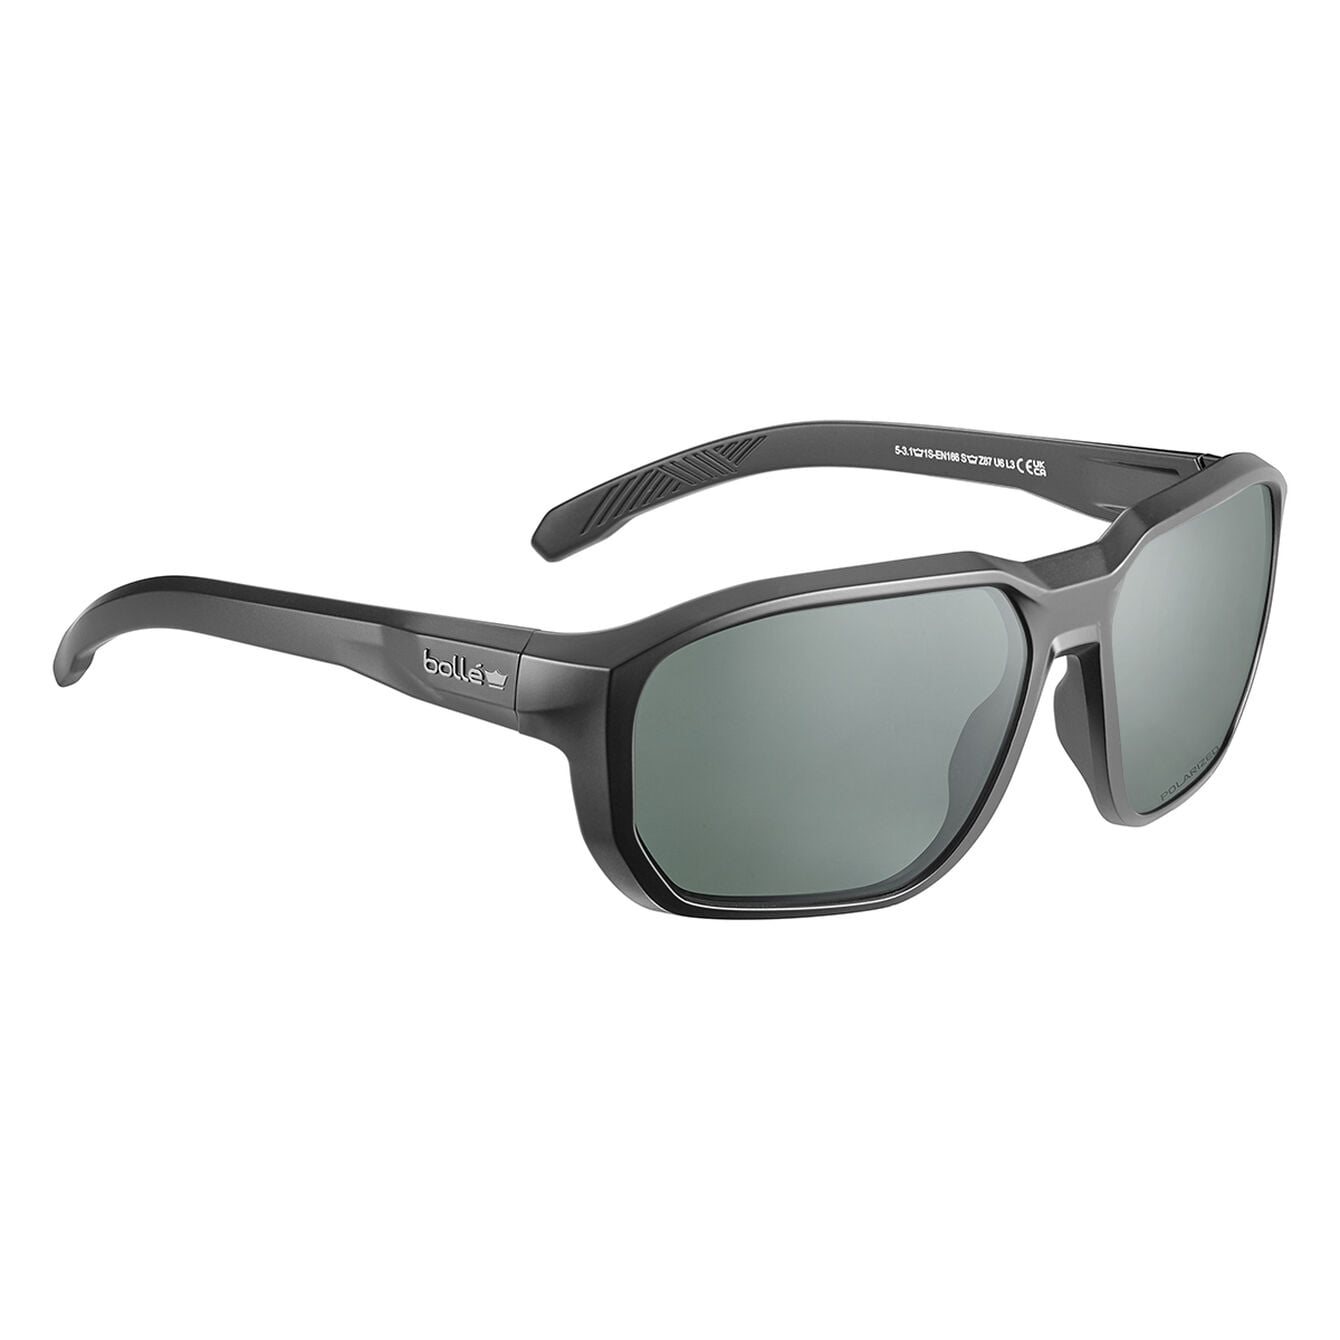 BOLLE Protective glasses KNOX polarized